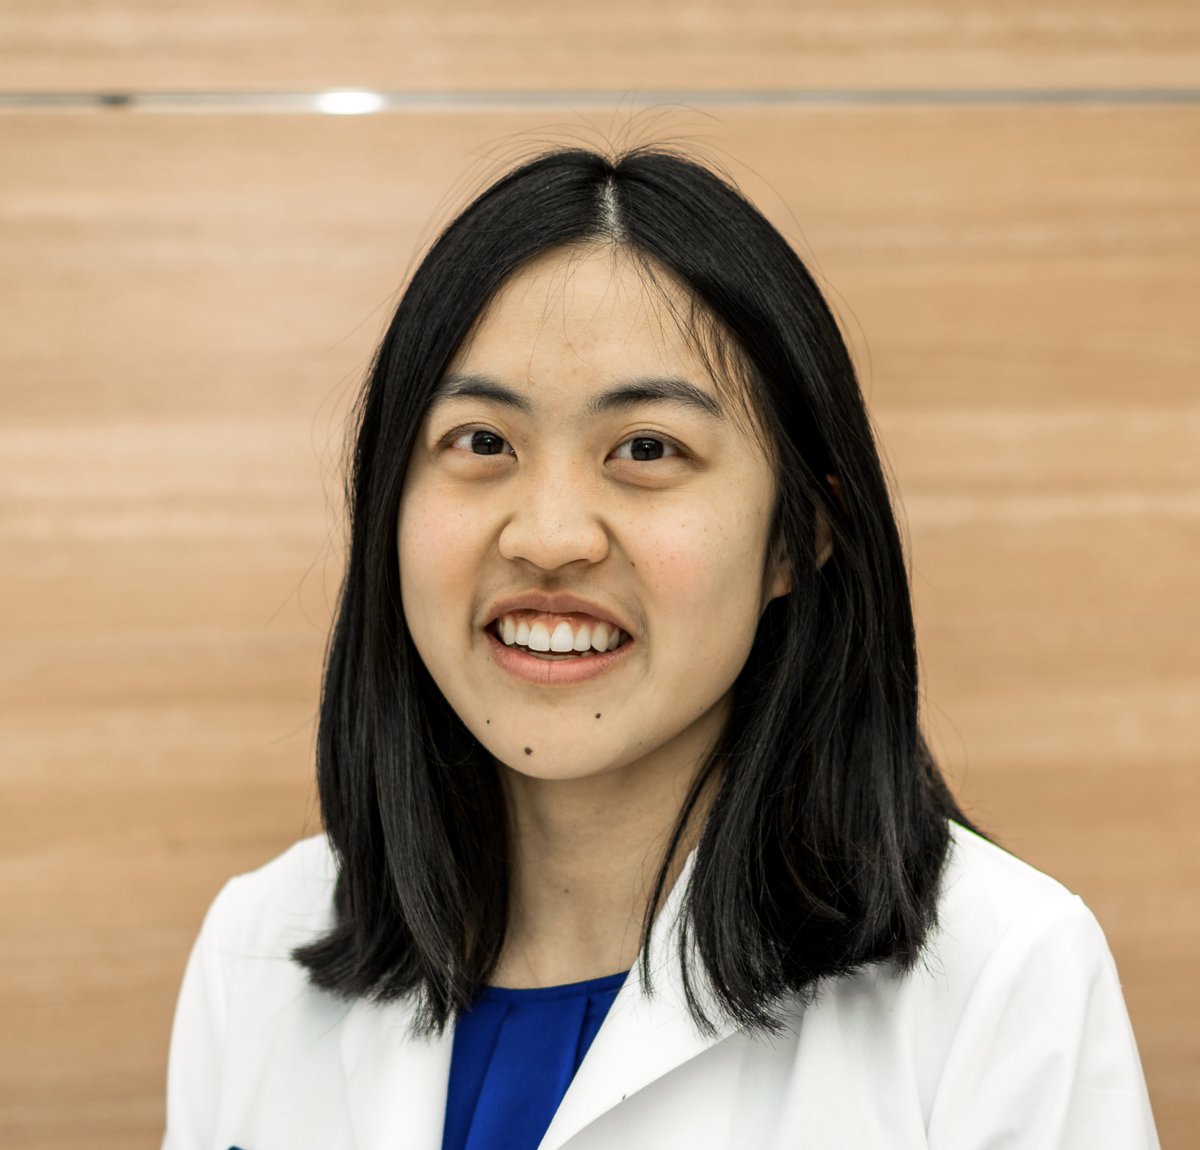 Bioengineering doctoral graduate @KarenLXu_ has been honored with a Scholar Award from the P.E.O. Sisterhood, recognizing her high level of academic achievement and potential for having a positive impact on society. #PennBioengineering @PennEngineers bit.ly/3Wr3HCO